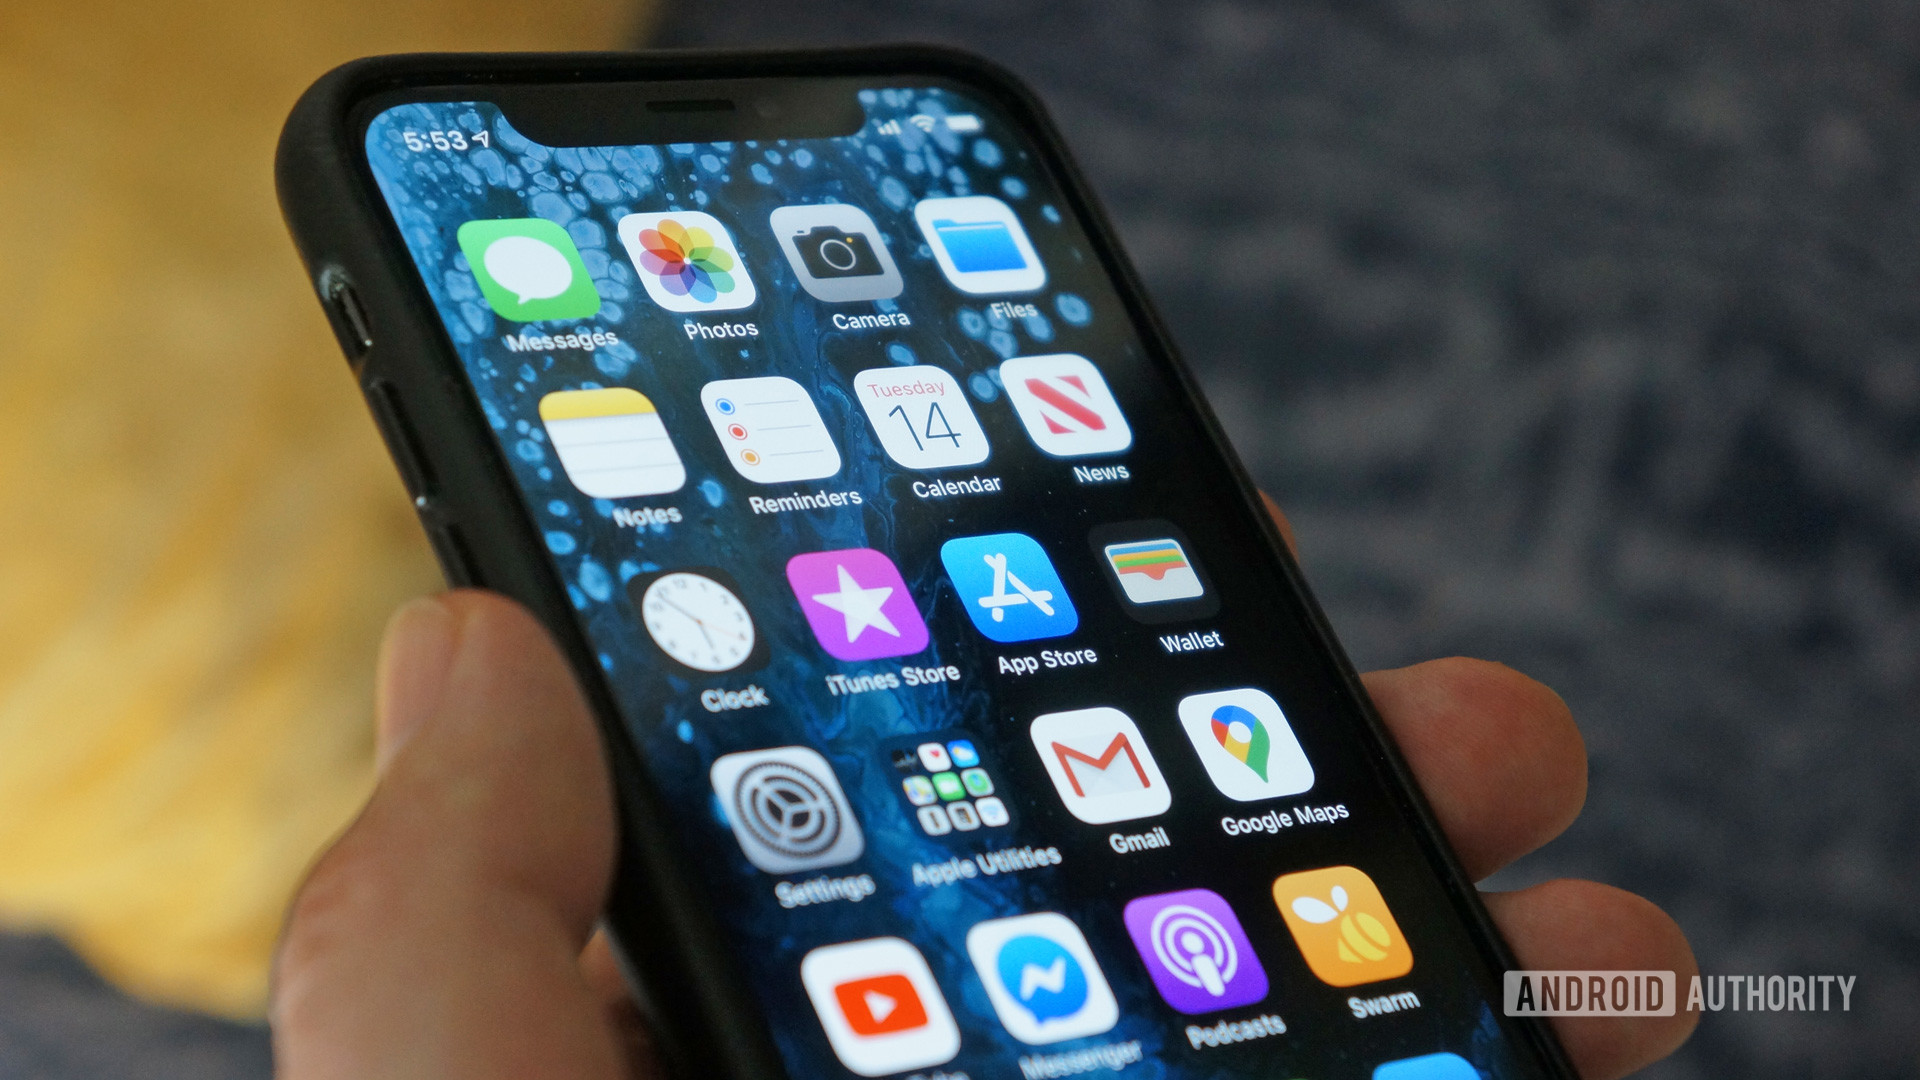 An Apple iPhone XS being held by a hand with its screen on showing various app icons.